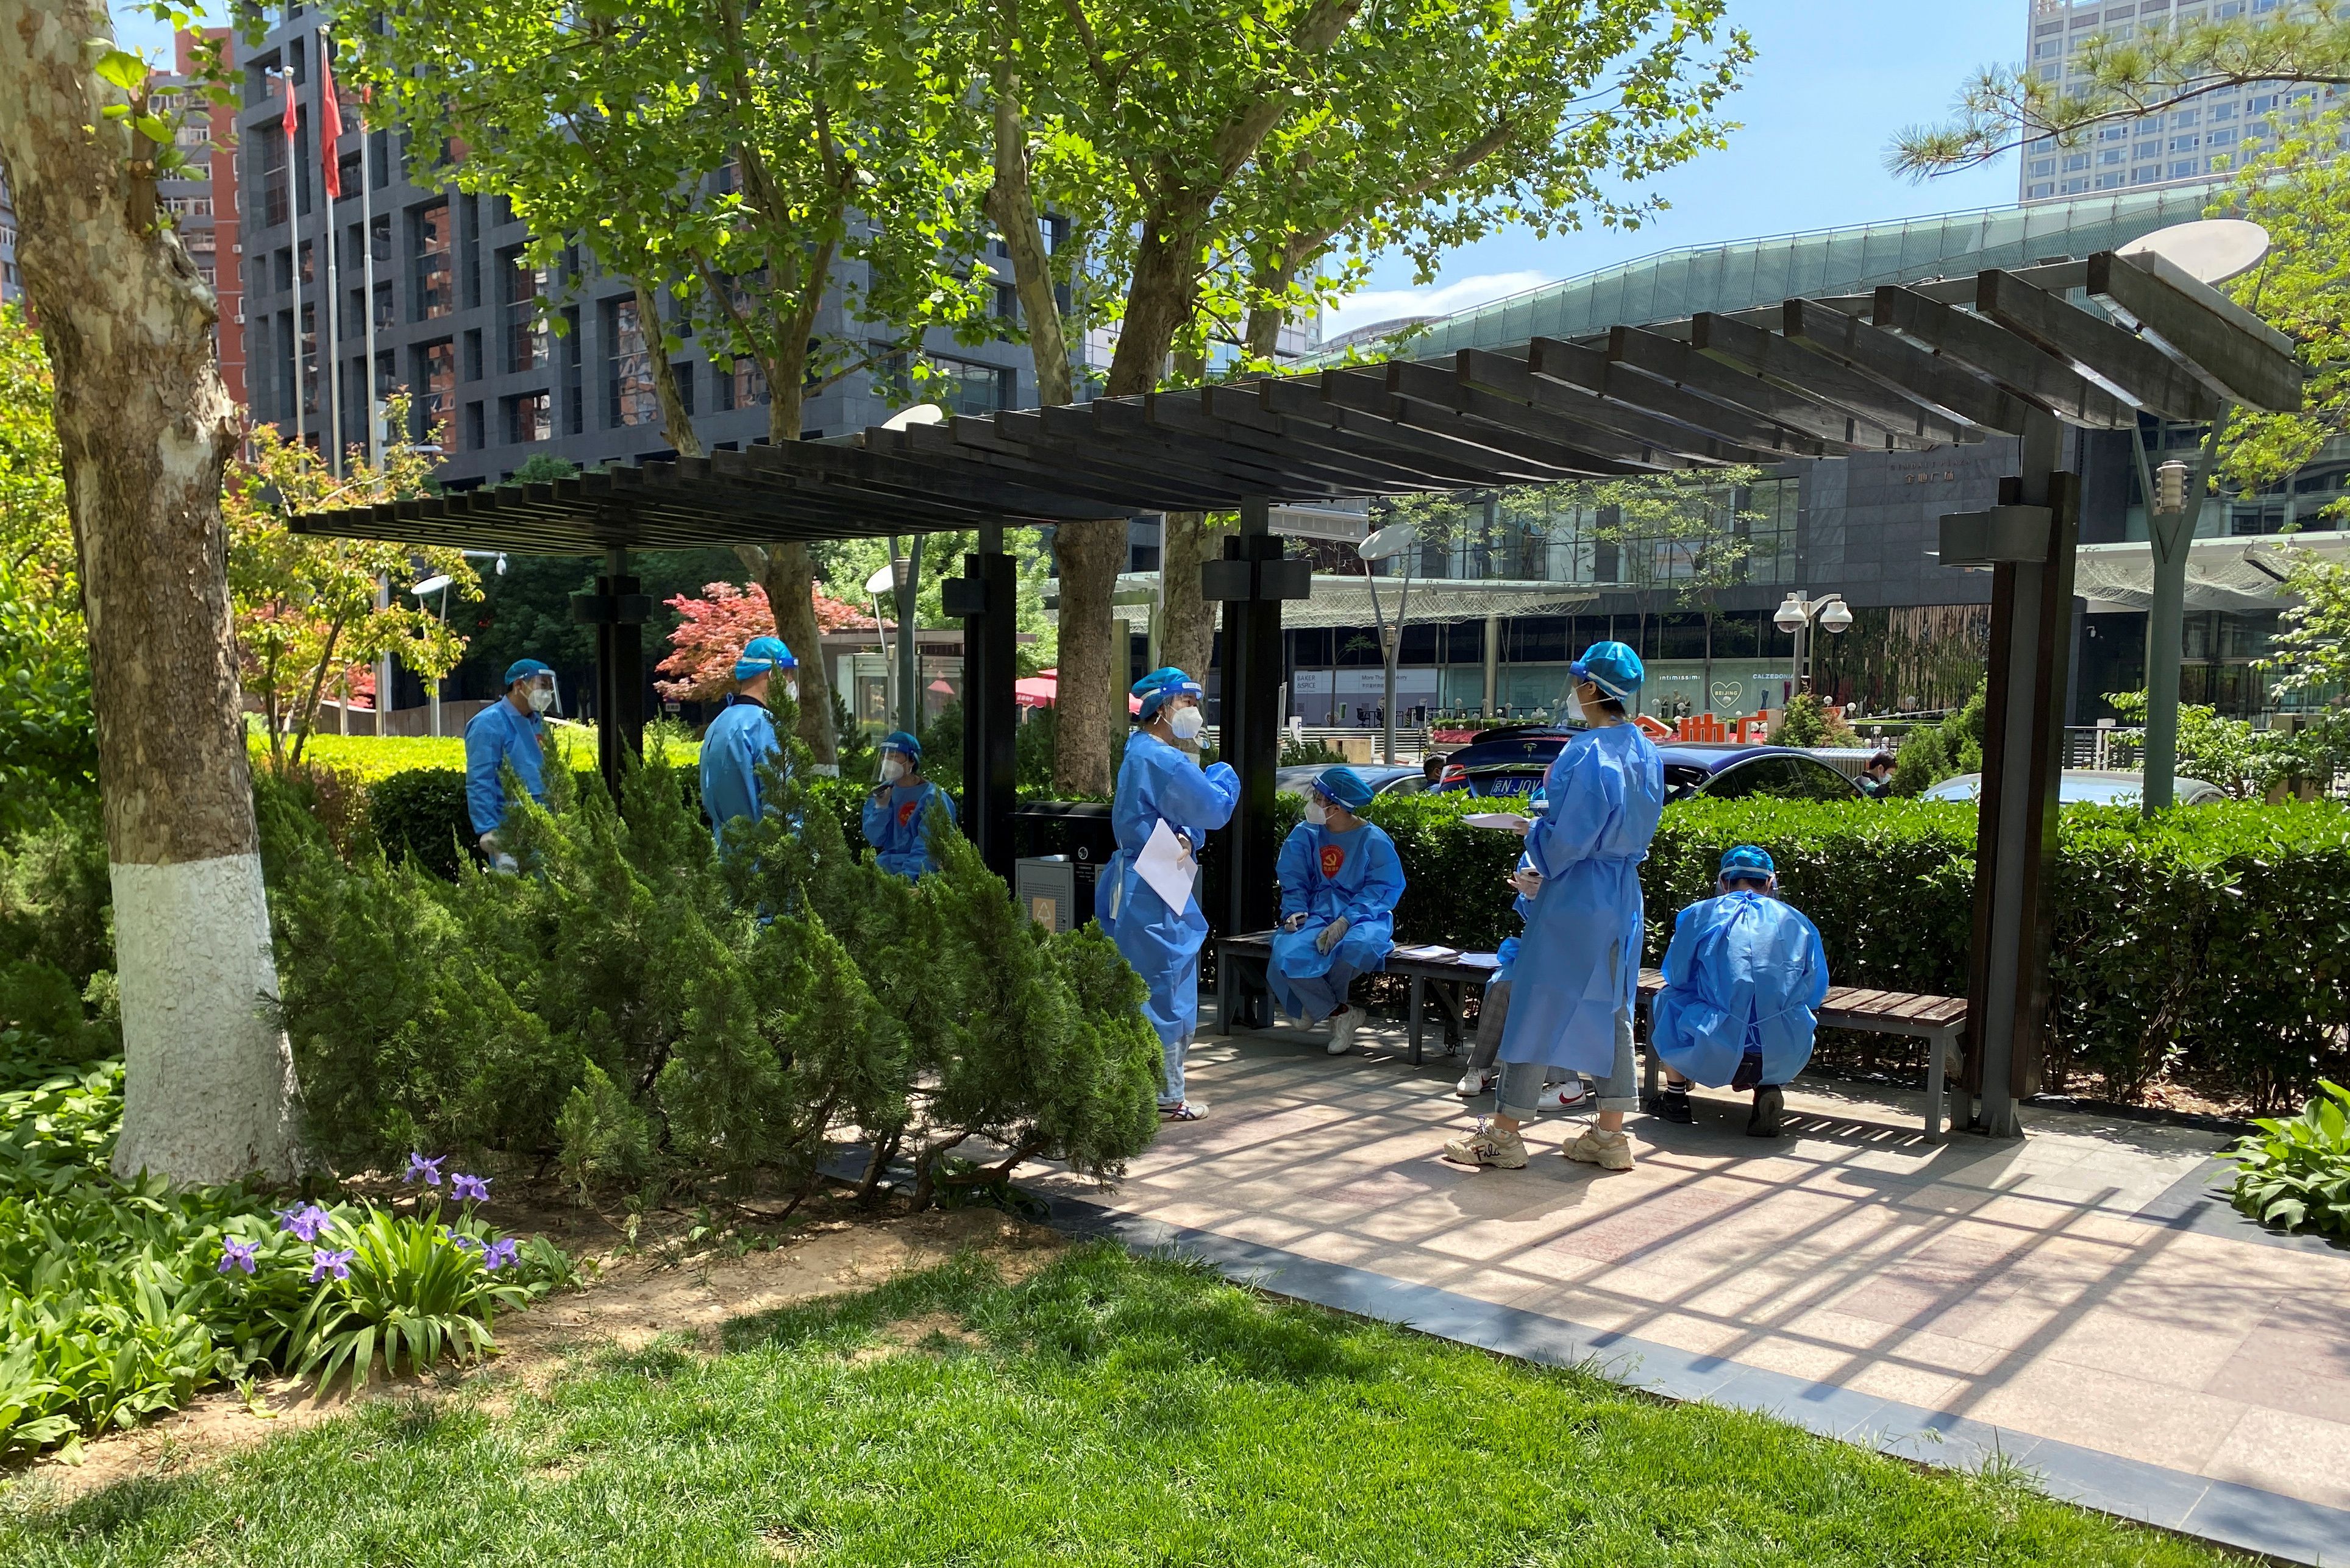 Workers in protective suits gather at a residential complex amid the coronavirus disease (COVID-19) outbreak, during the Labor Day holiday in the Chaoyang district of Beijing, China.